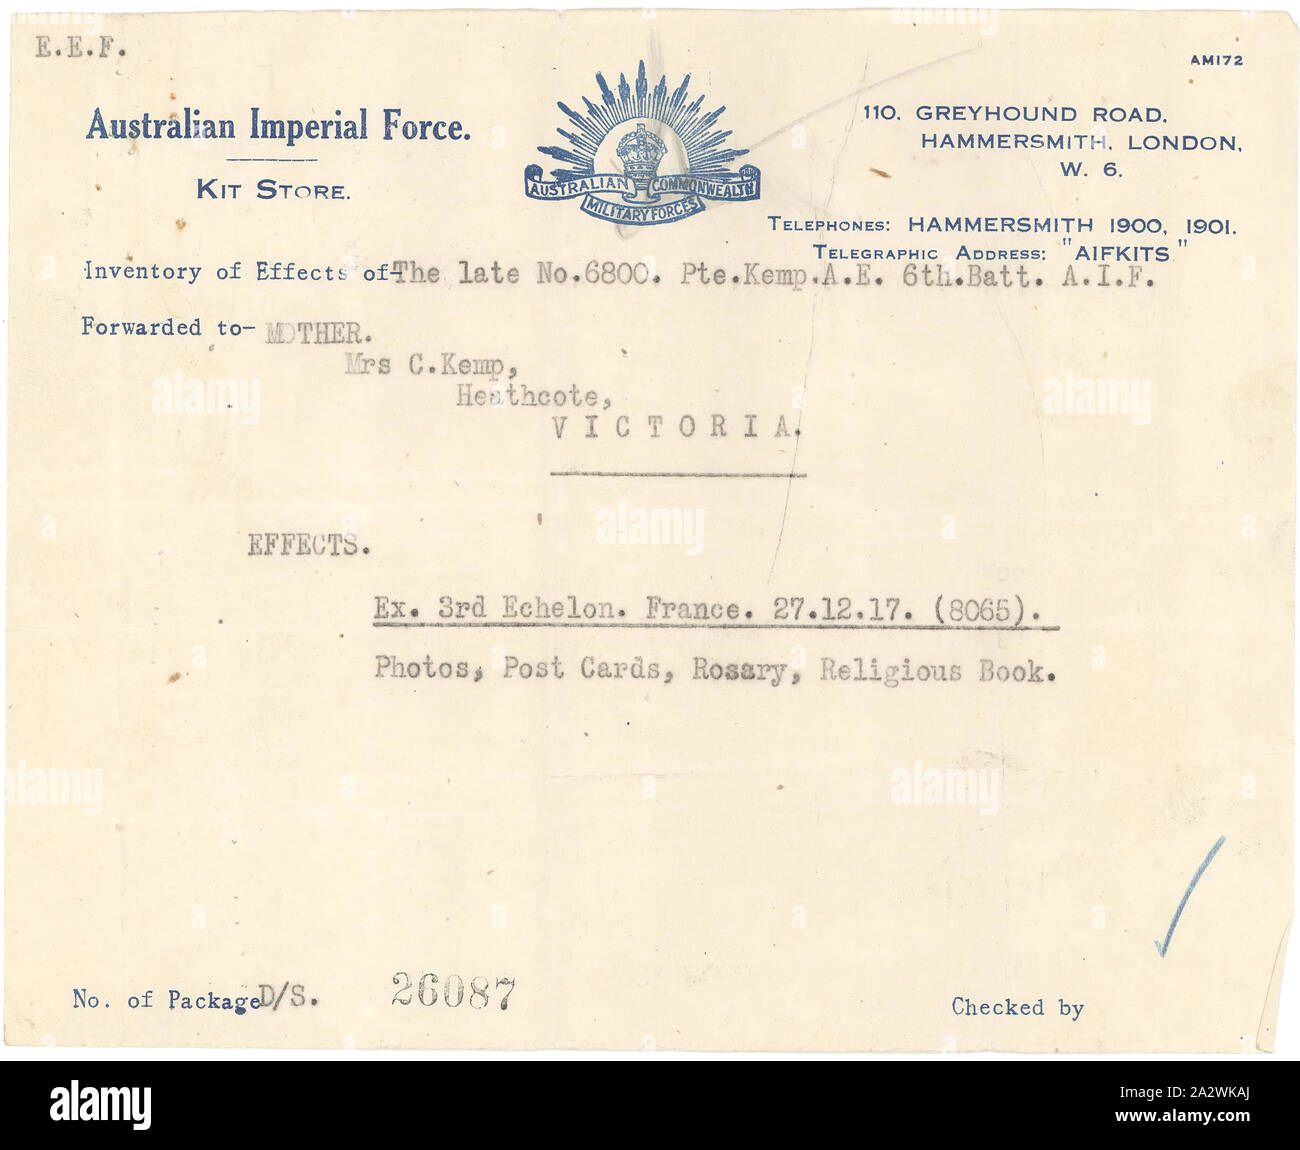 Letter - Australian Imperial Force, Inventory of Personal Effects, May 1918, Letter from the Australian Imperial Force Kit Store, London, to Mrs C. Kemp of Heathcote relating to the return of personal effects from her husband, Private A. E. Kemp, a World War I soldier killed in action. It probably dates to May 1918. The letter lists the effects in an accompanying parcel: photos, post cards, a rosary and a religious book. Unfortunately, the parcel should have been sent to Stock Photo